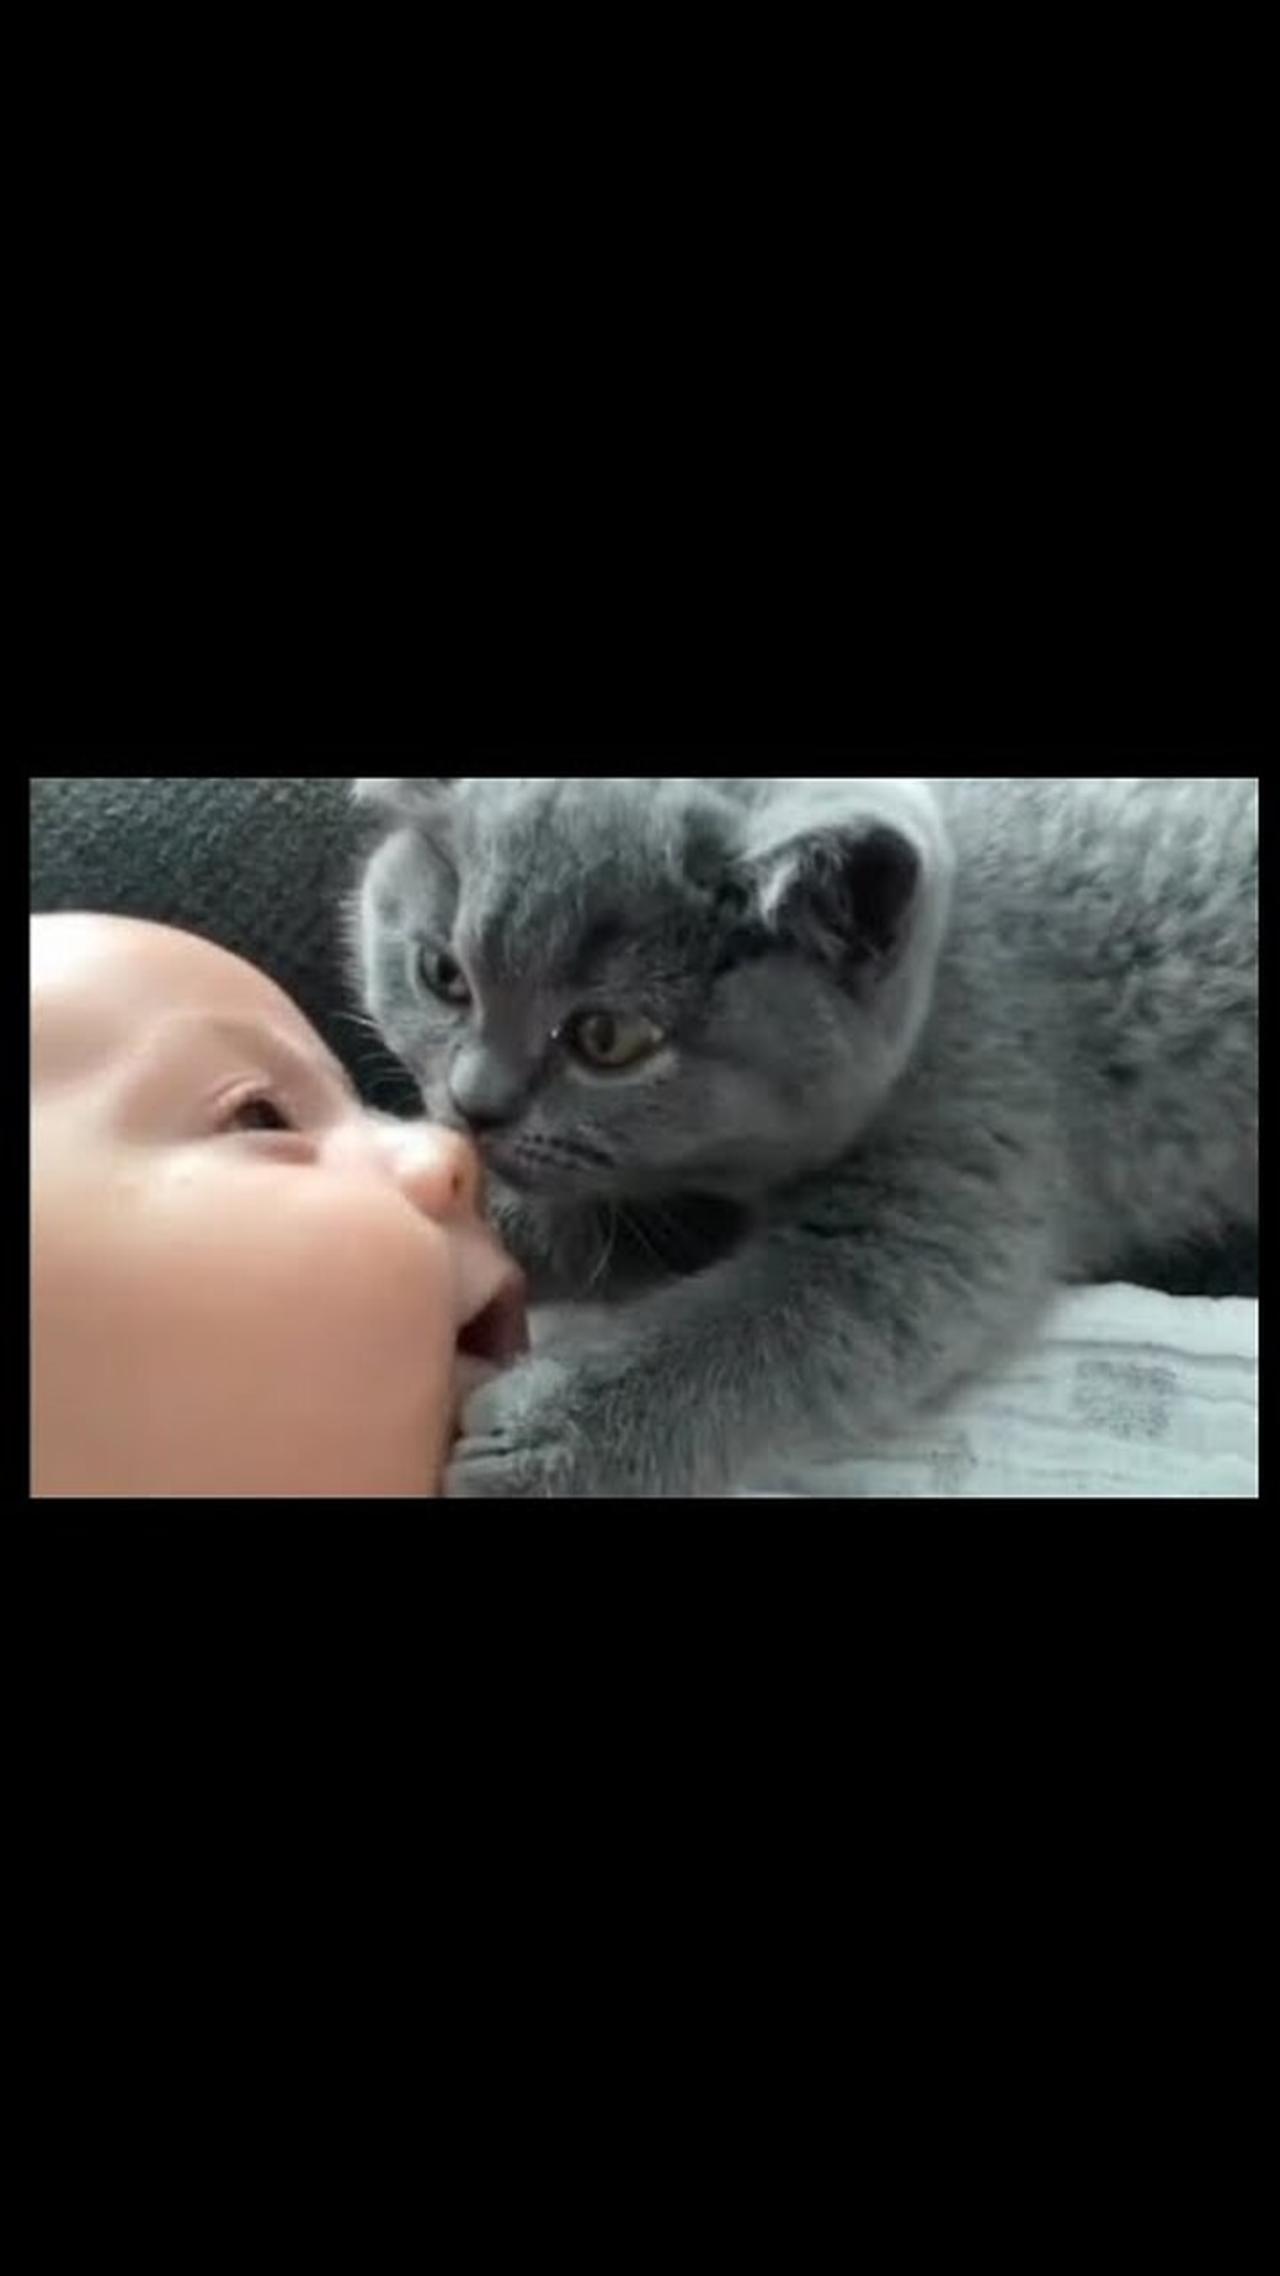 Cats really love children | So cute